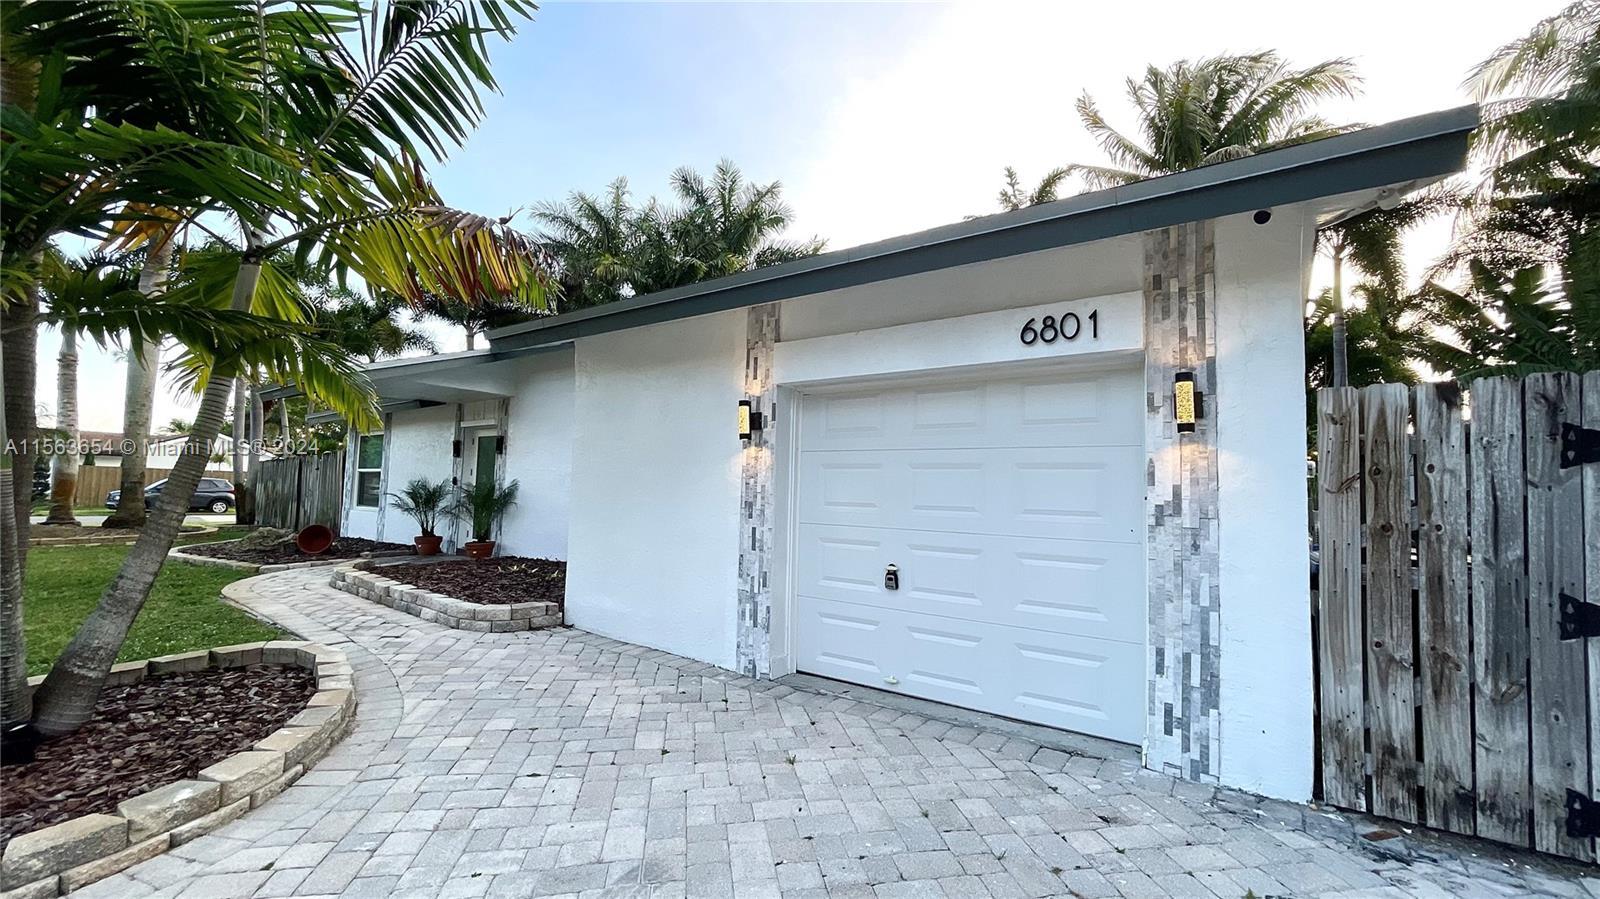 Photo of 6801 NW 26th Wy in Fort Lauderdale, FL